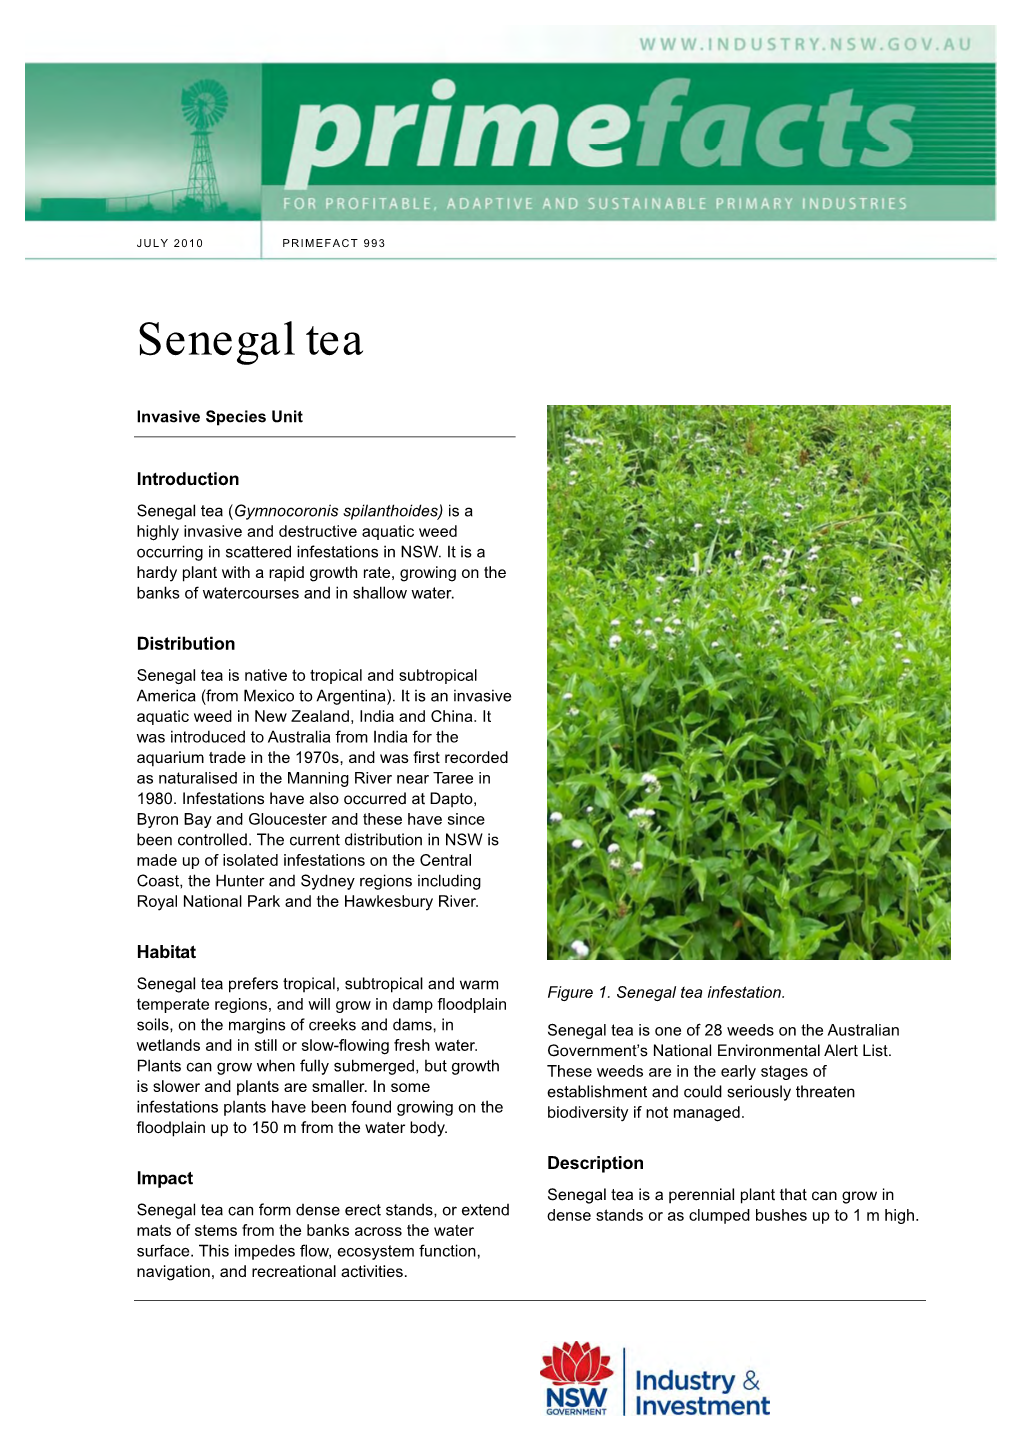 Senegal Tea Plant – Gymnocoronis Spilanthoides Local Control Authorities in NSW Have Achieved Weed Management Guide